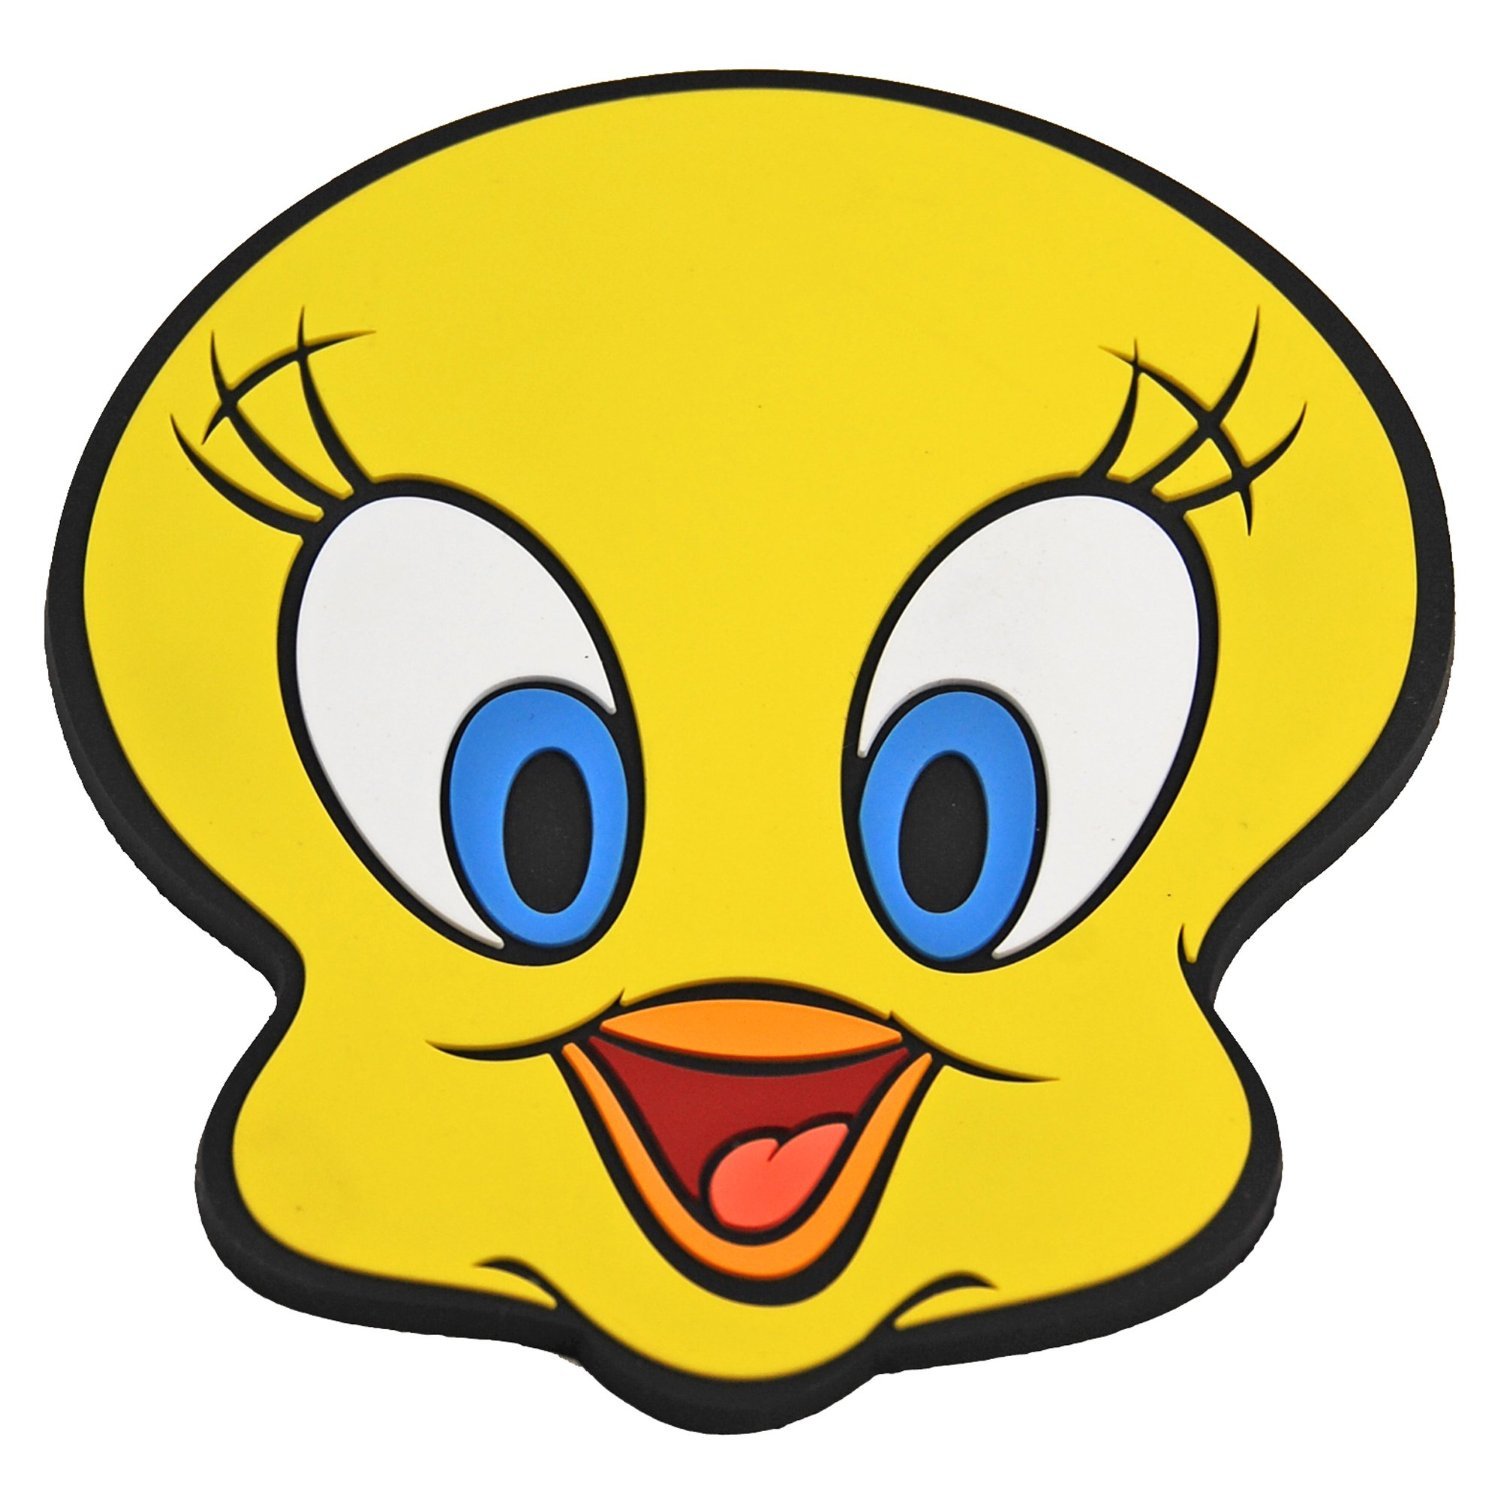 Looney Tunes - Tweety Face Coaster Image at Mighty Ape NZ